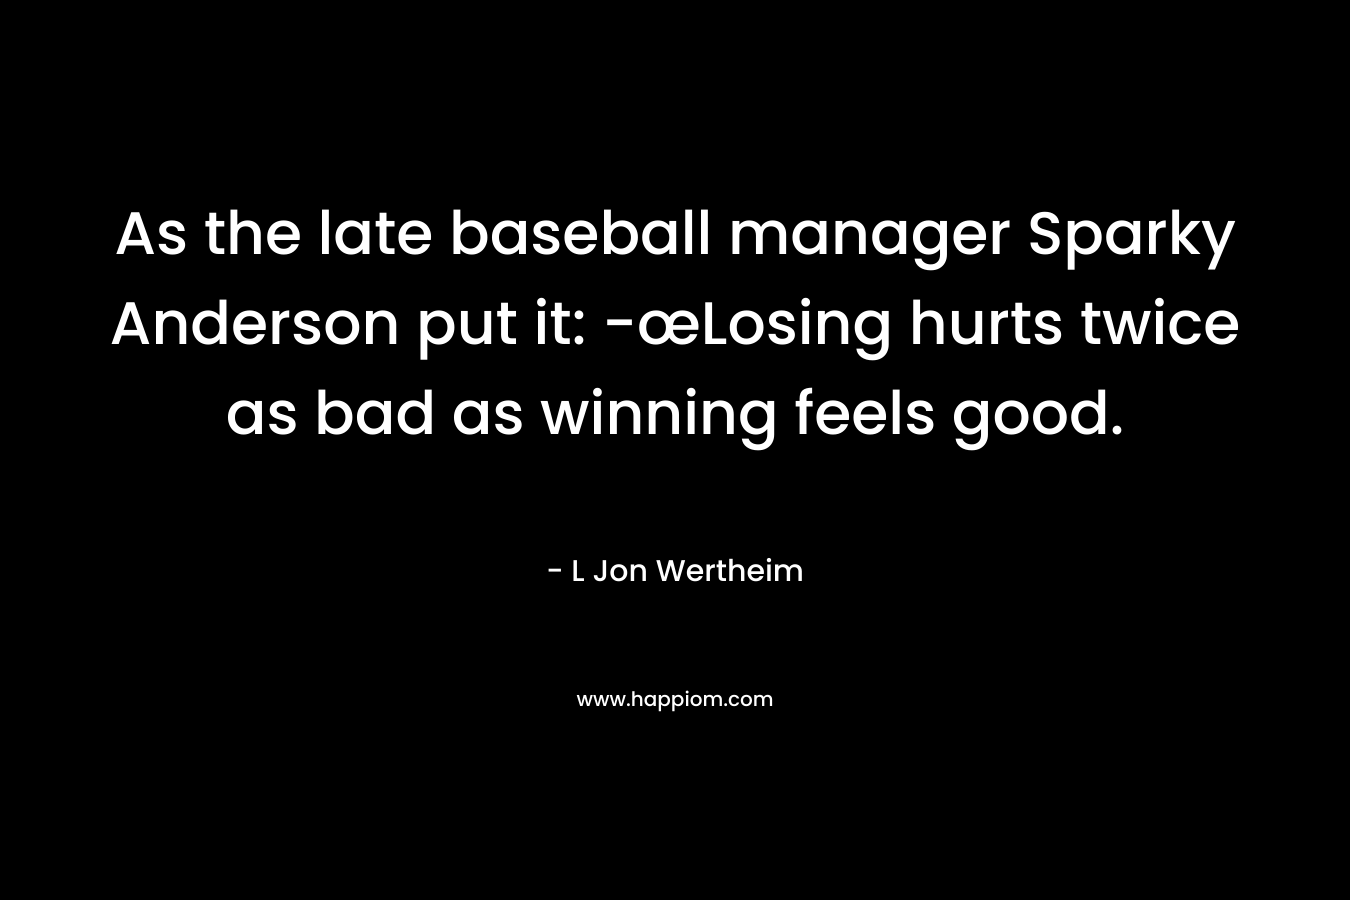 As the late baseball manager Sparky Anderson put it: -œLosing hurts twice as bad as winning feels good.